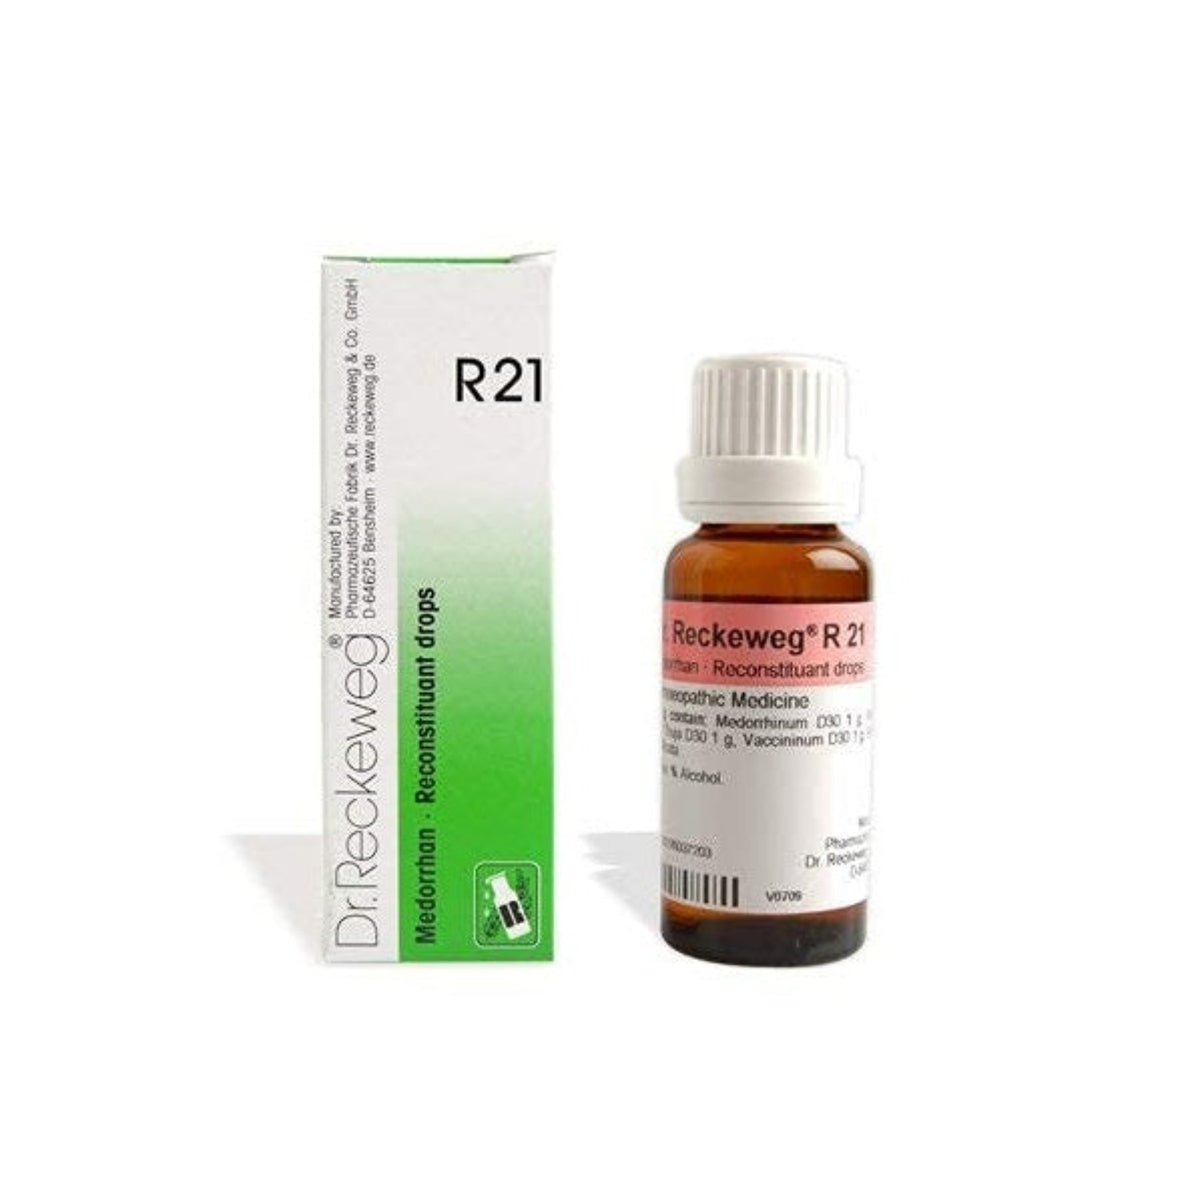 Dr Reckeweg Homoeopathy R21 Reconstituant Drops 22 ml